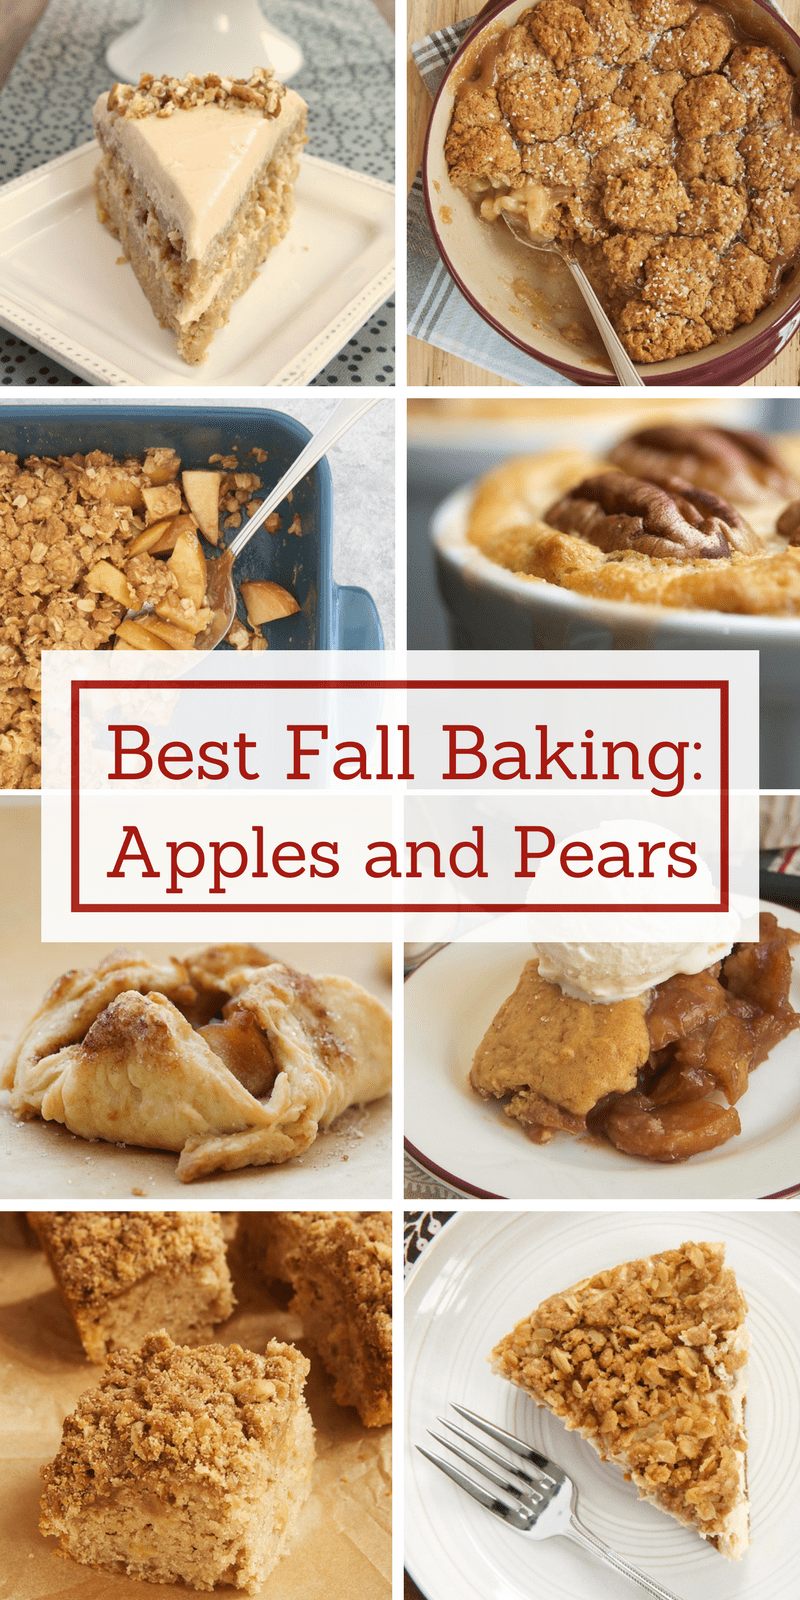 Apple and pear desserts are what fall baking is all about! Come find the best and most popular apple and pear recipes from Bake or Break in this essential fall baking collection.